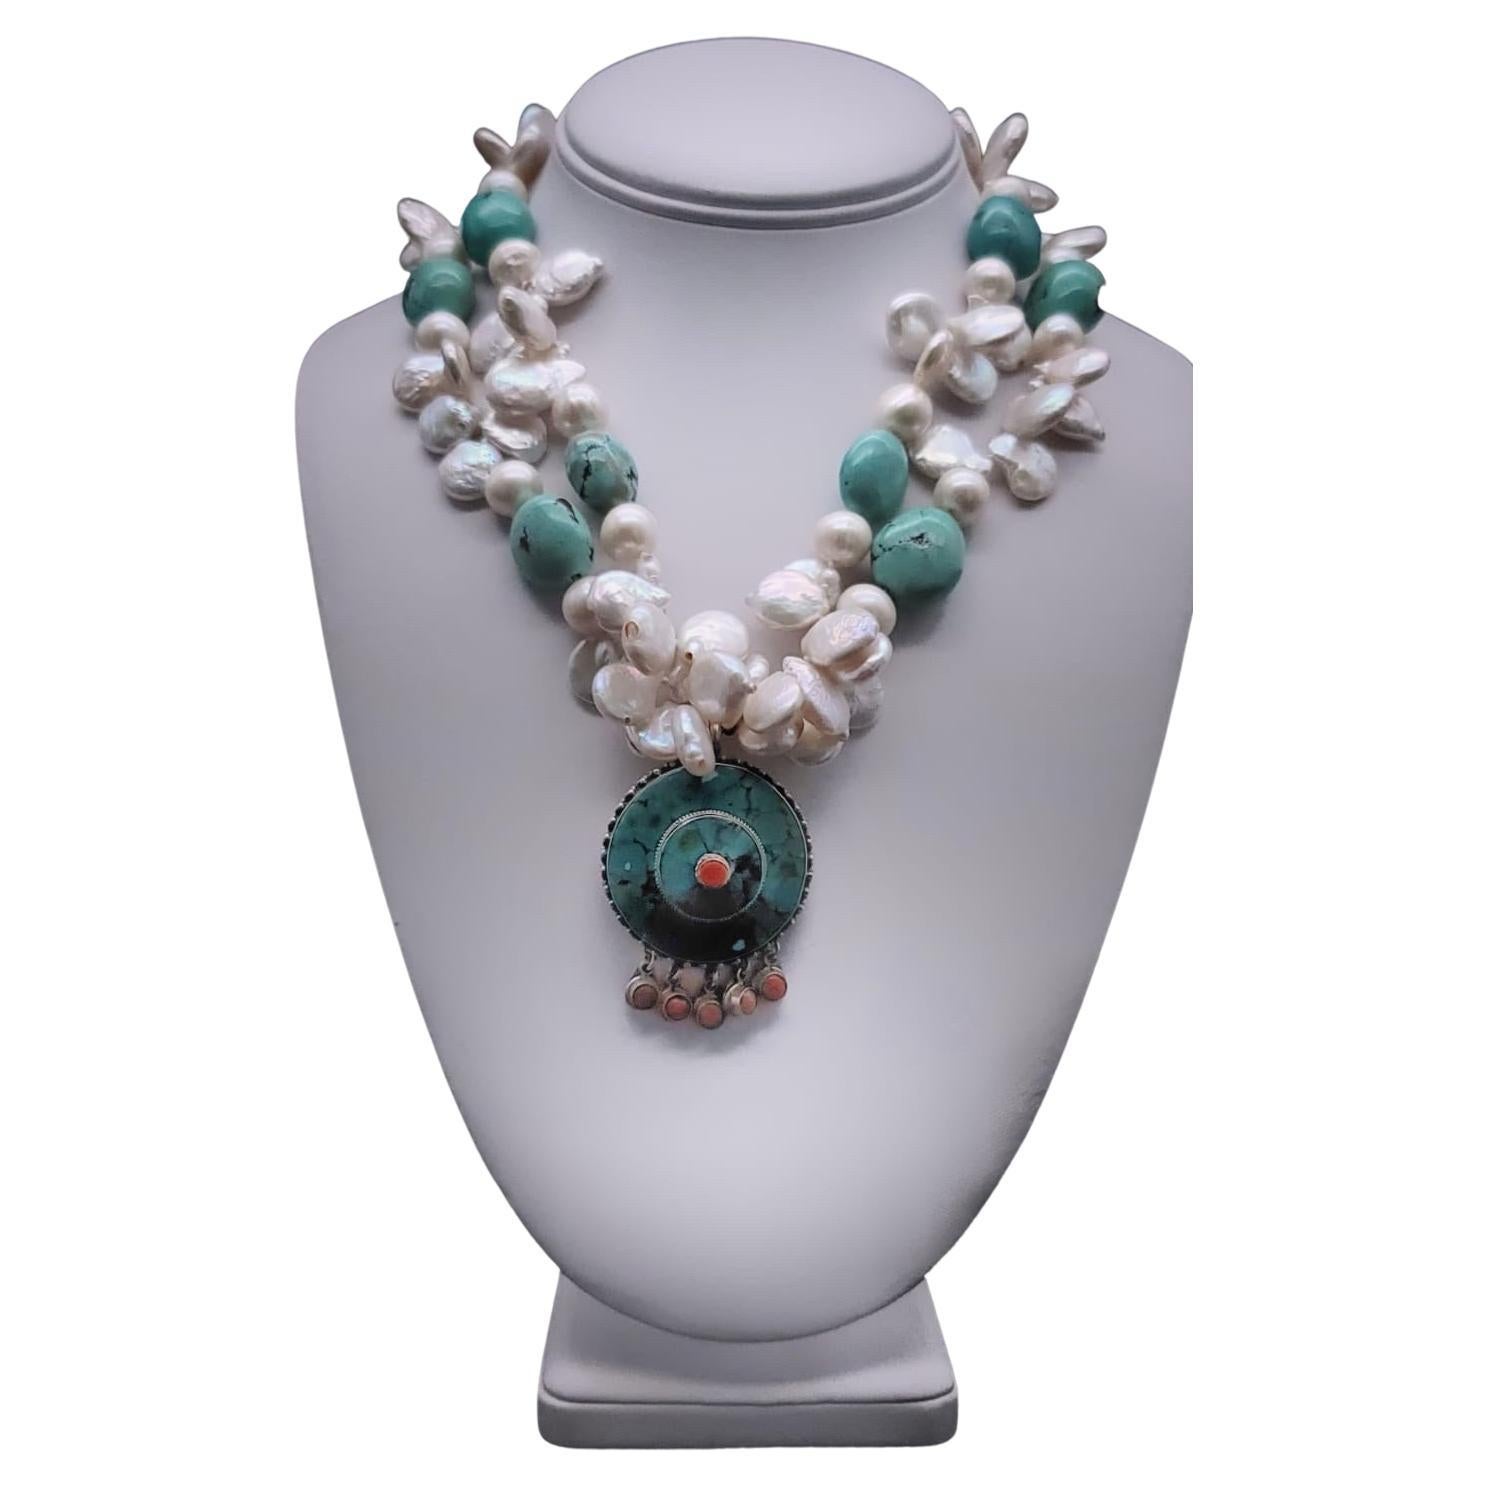 A.Jeschel Flattering Turquoise and Pearl necklace with Tibetan Pendant.